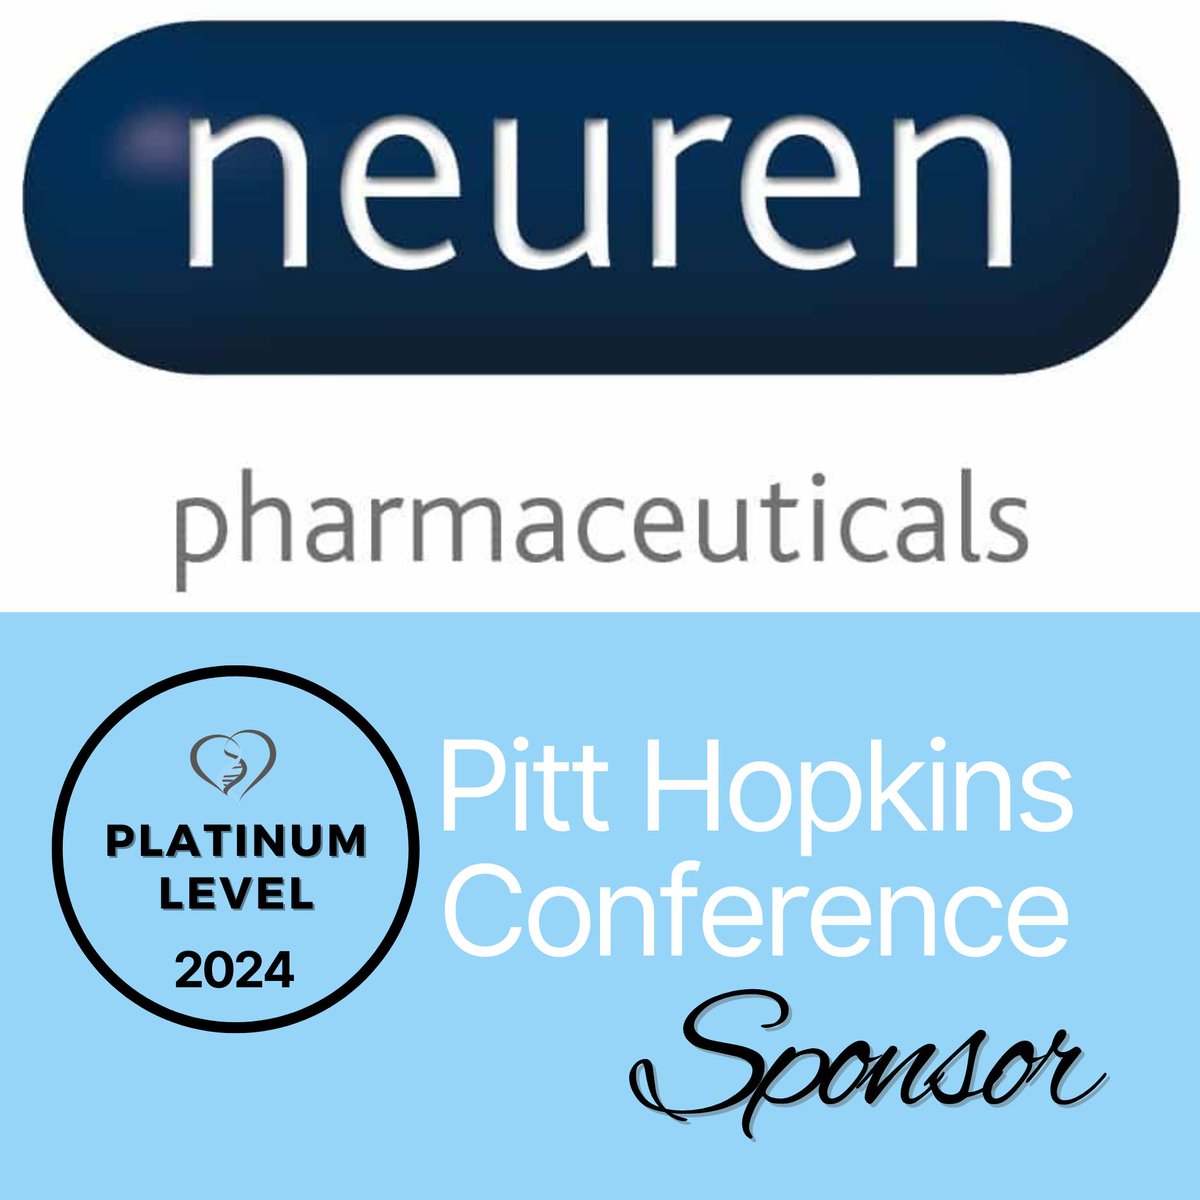 Thank you to #Neuren Pharmaceuticals for being a platinum sponsor for our 2024 #PittHopkins Conference! Neuren is currently completing the clinical trial for NNZ-2591, with results expected later in 2024. For more info about Neuren, visit their website: neurenpharma.com